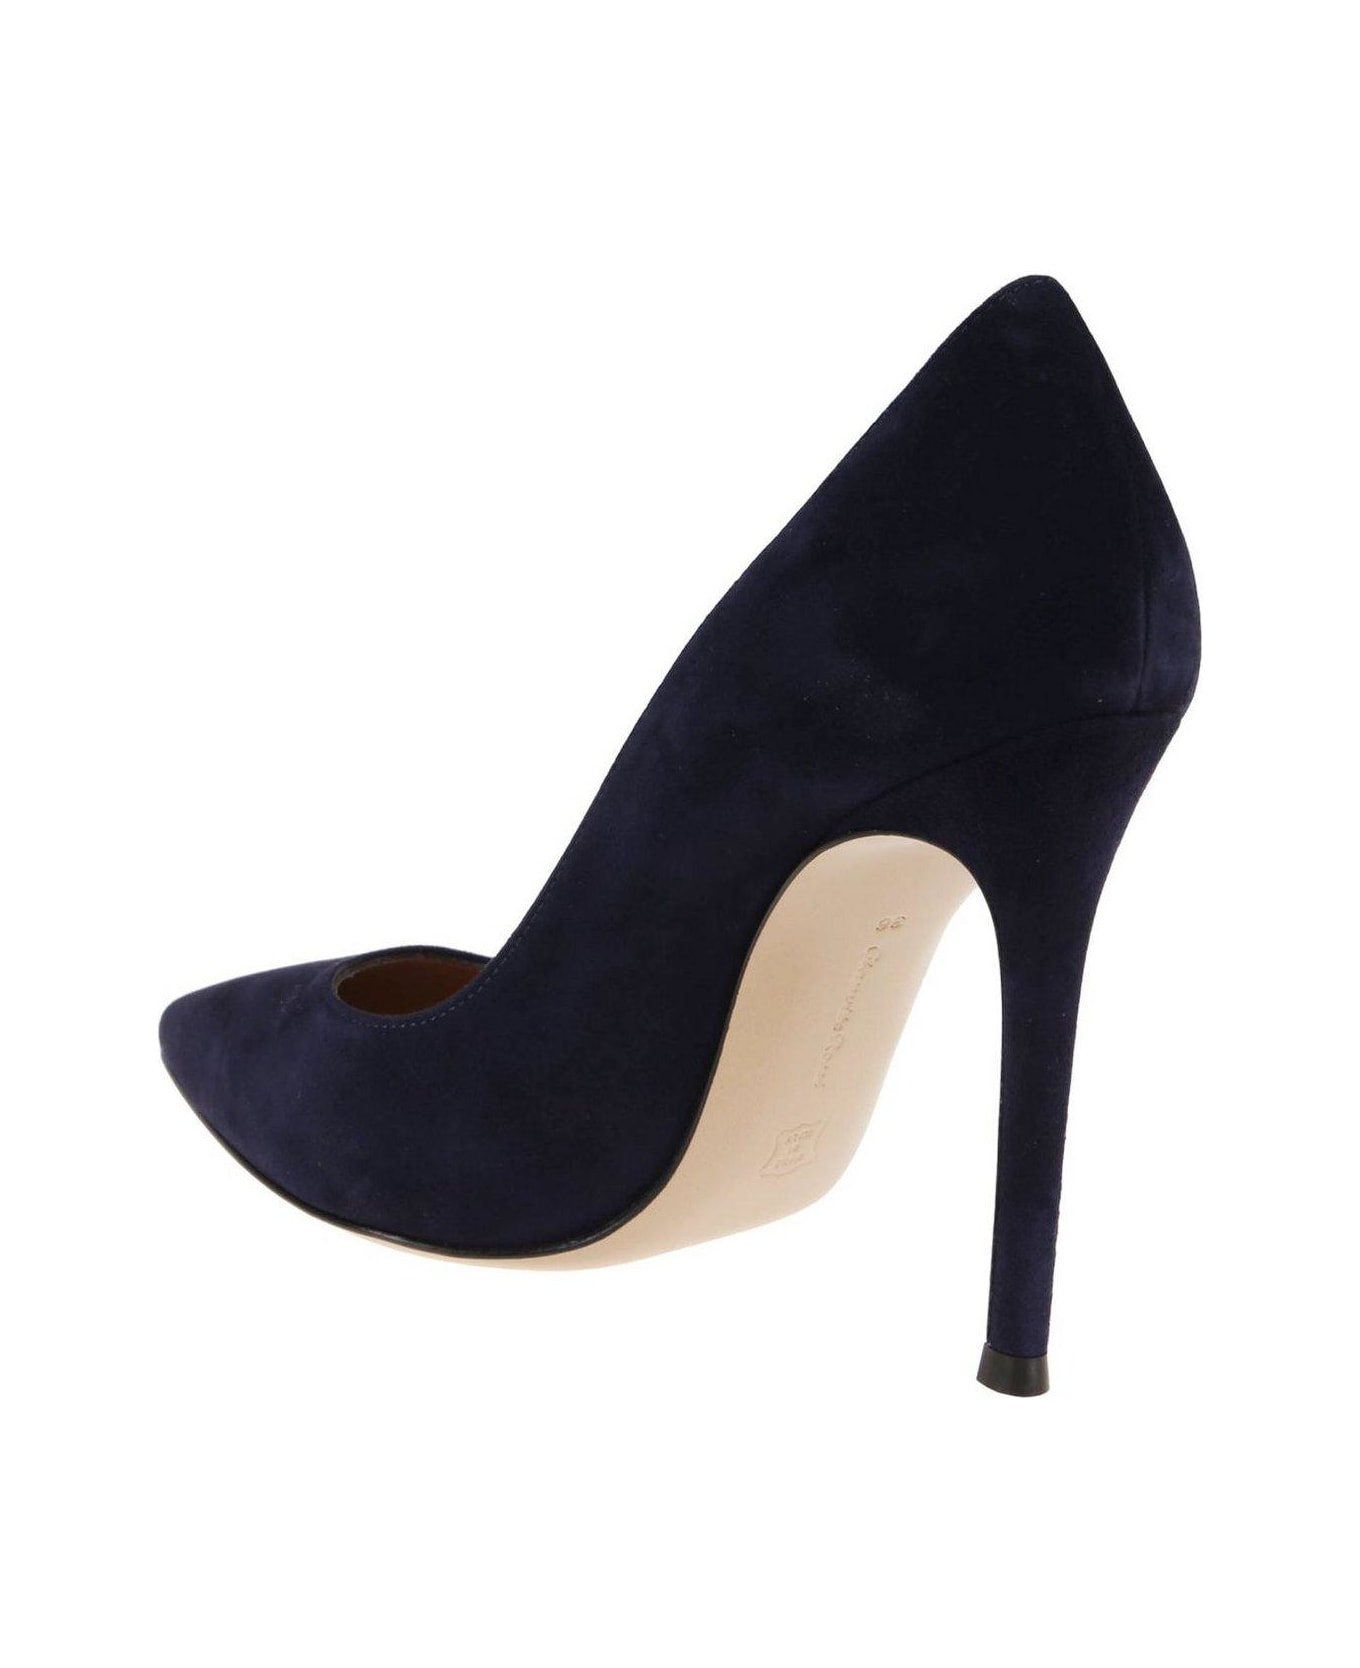 Gianvito Rossi Pointed Toe Pumps - Blue